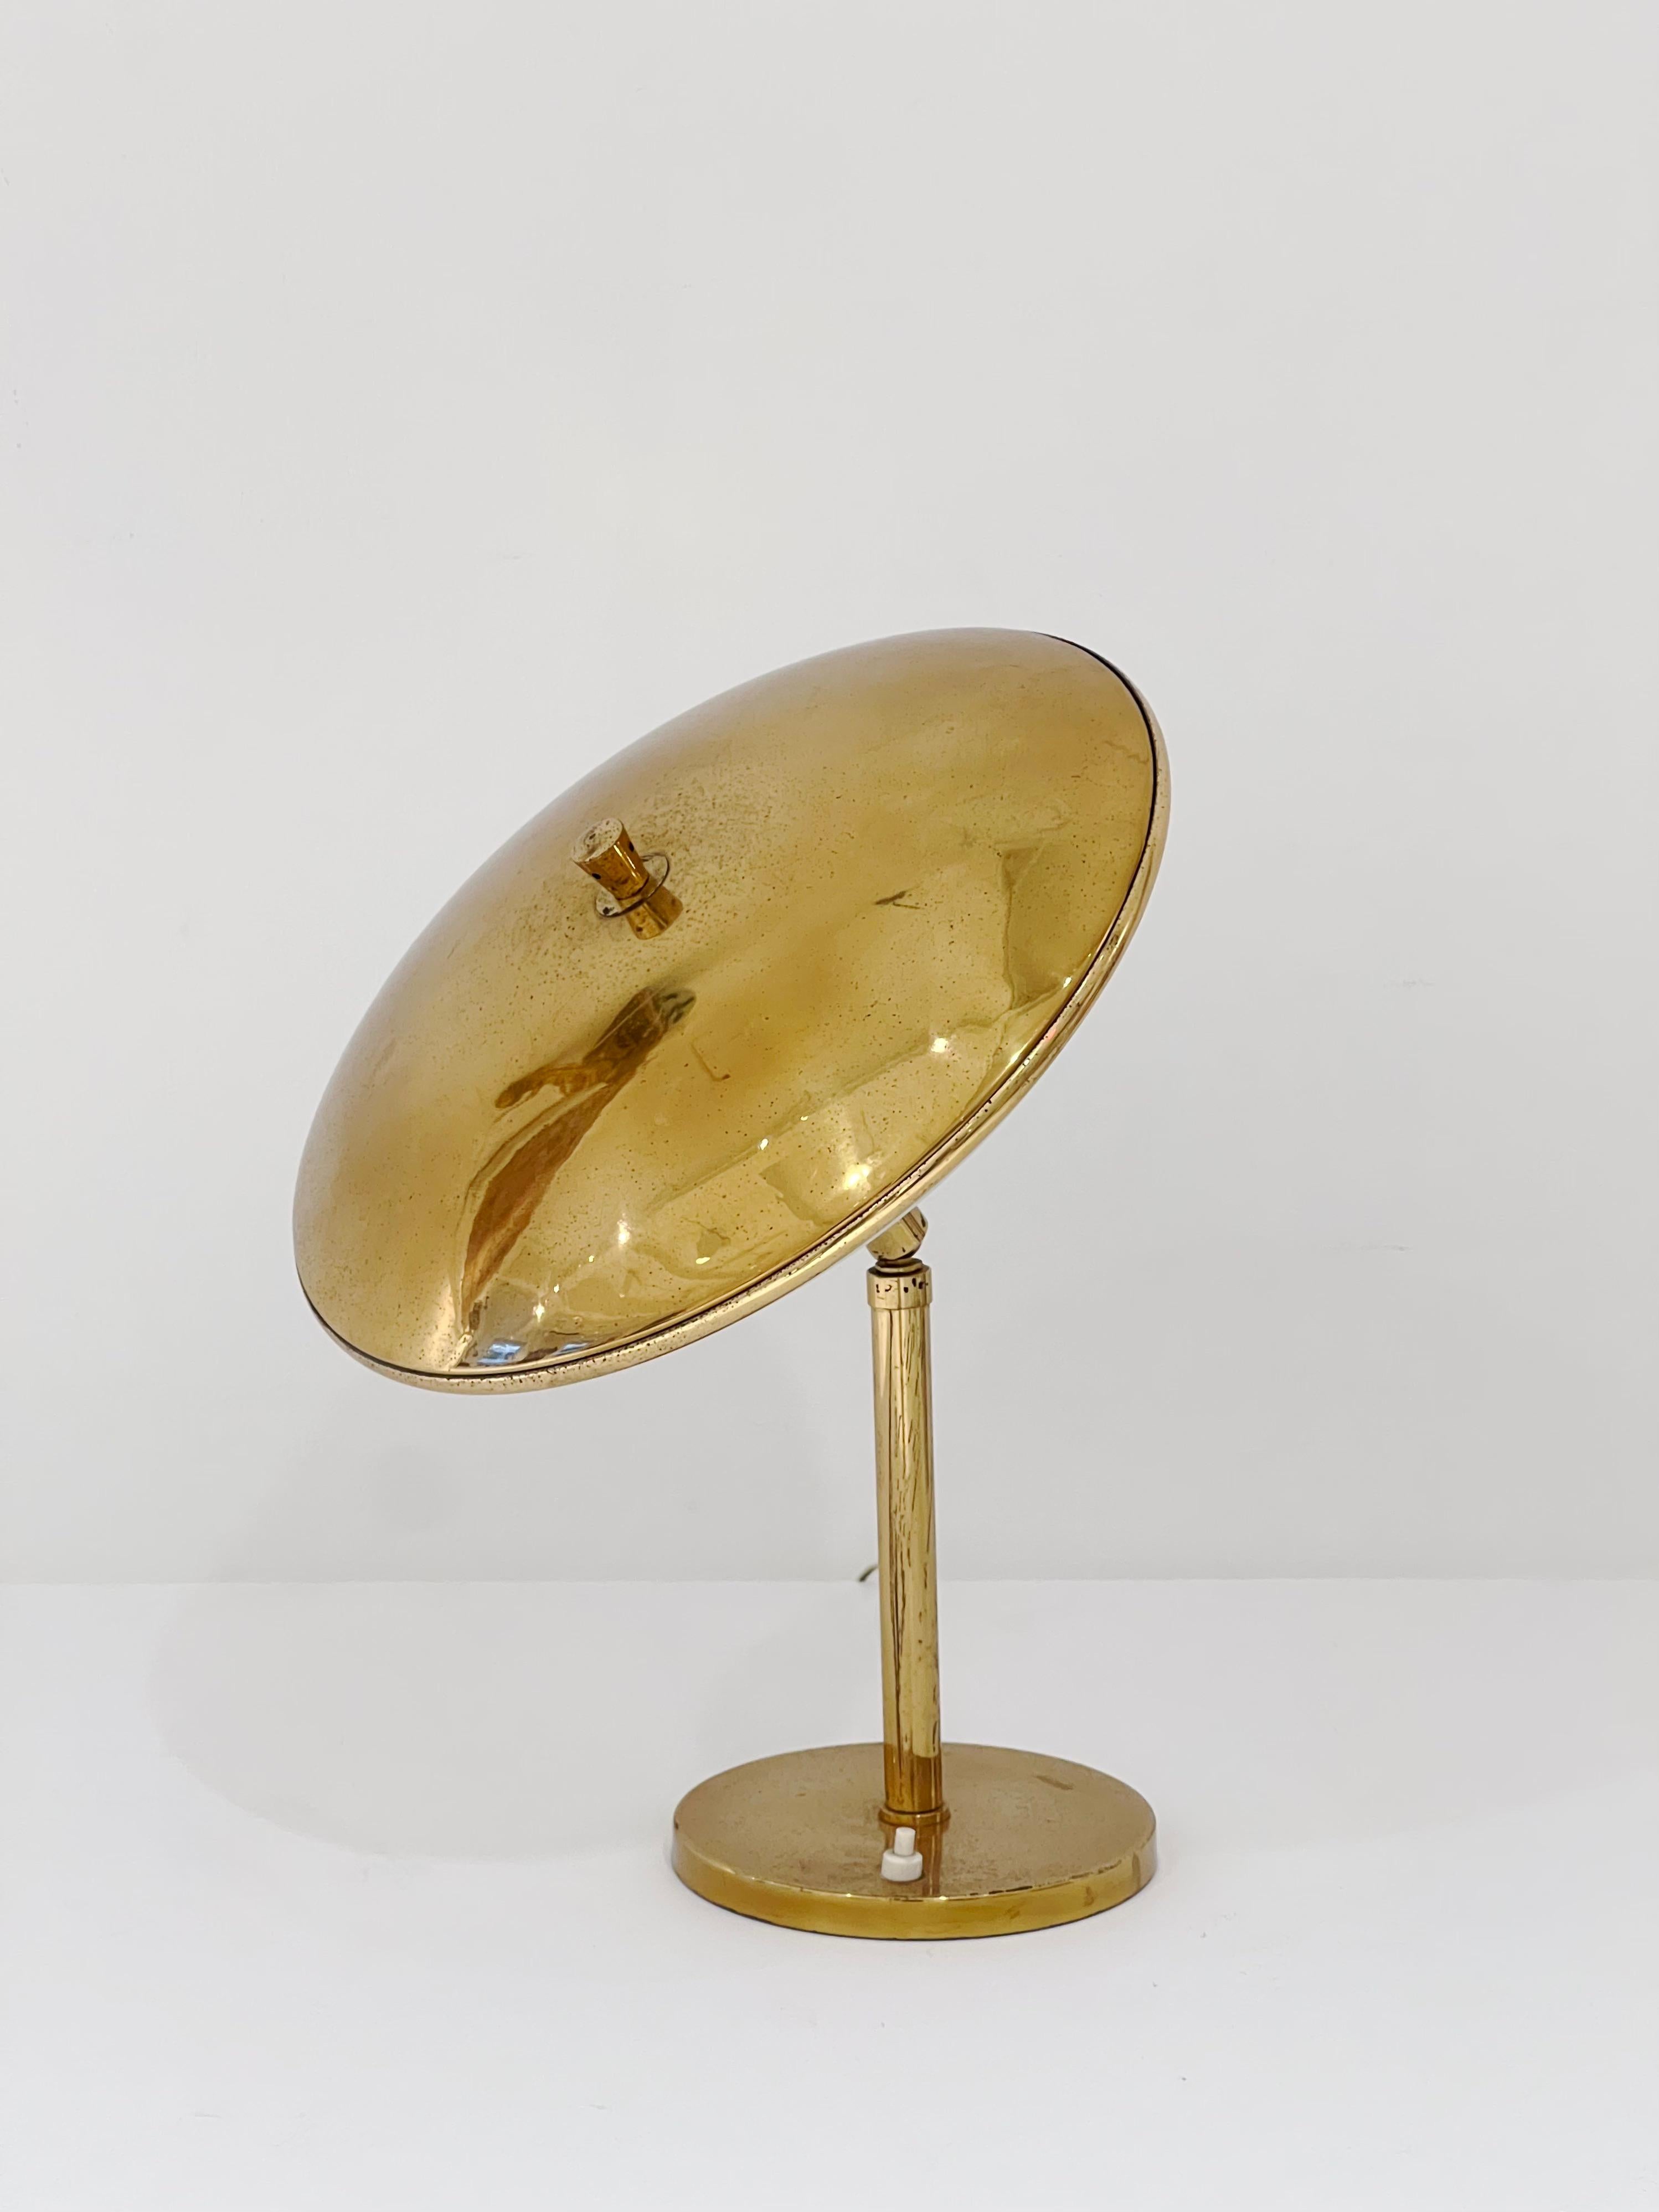 Brass and glass 'Saucer' table lamp by Max Ingrand for Fontana Arte, with ball joint articulation and frosted glass.